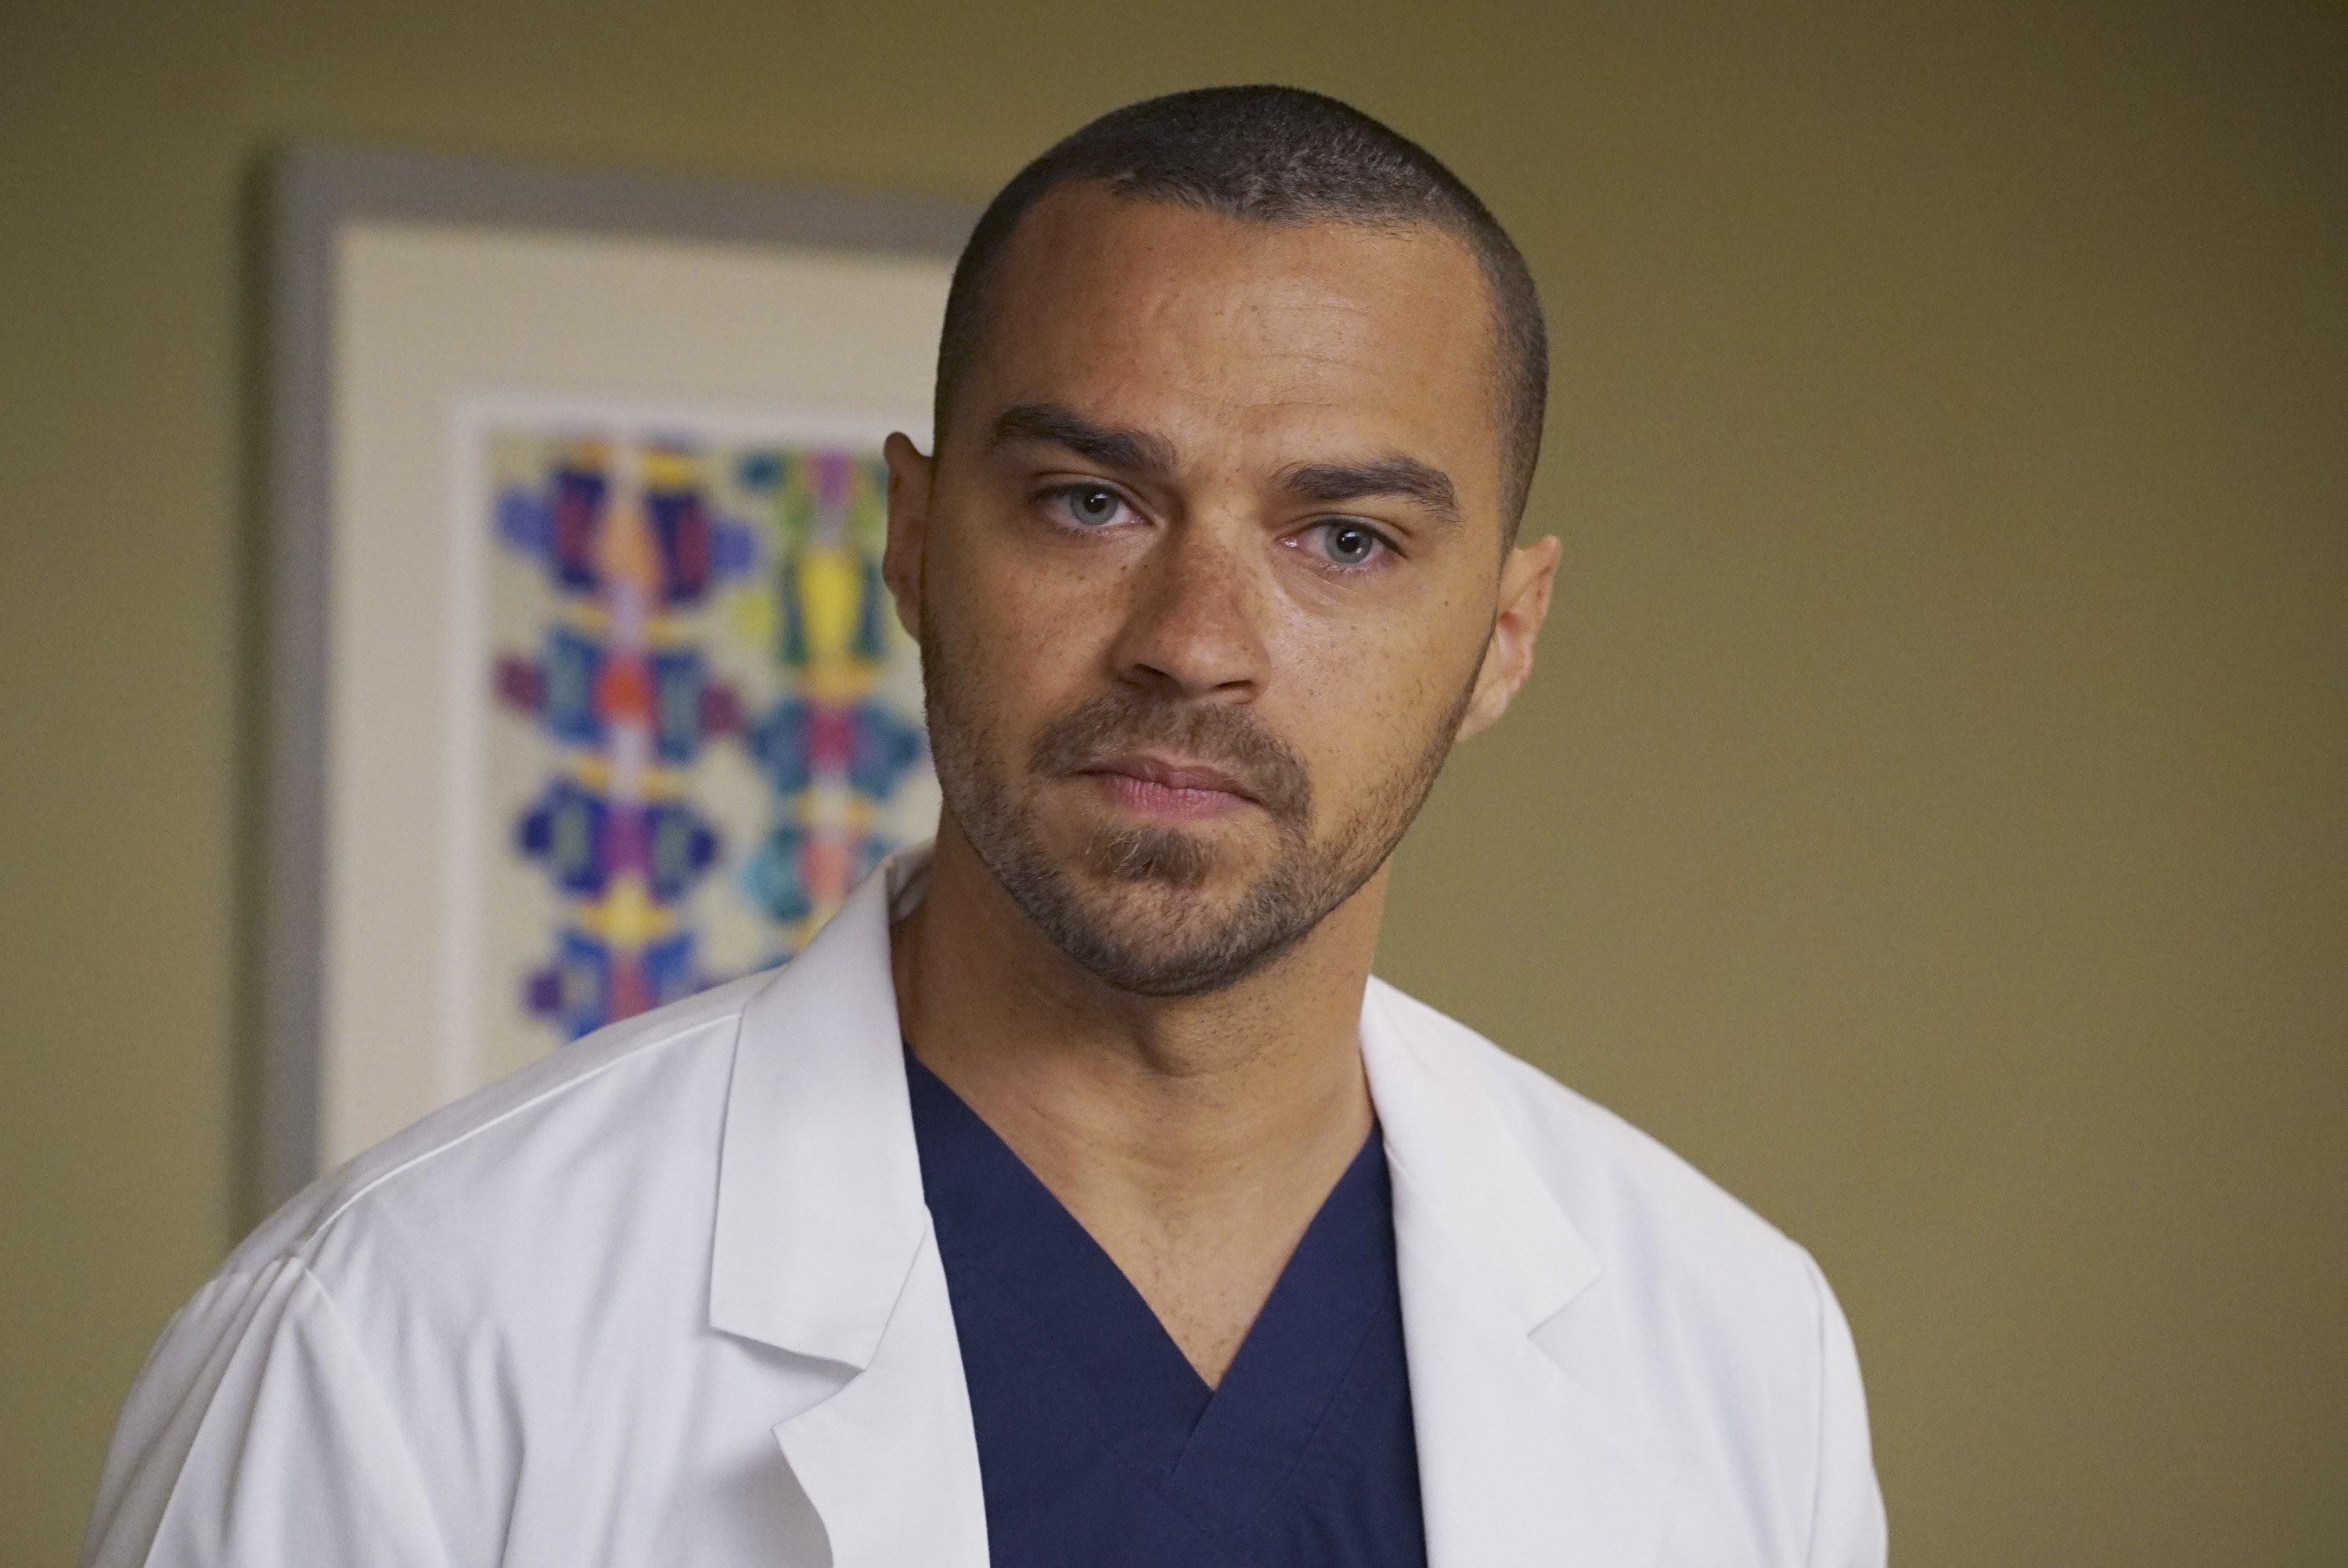 Jesse Williams as Dr. Jackson Avery on an episode of "Grey's Anatomy," 2016. | Photo: Getty Images